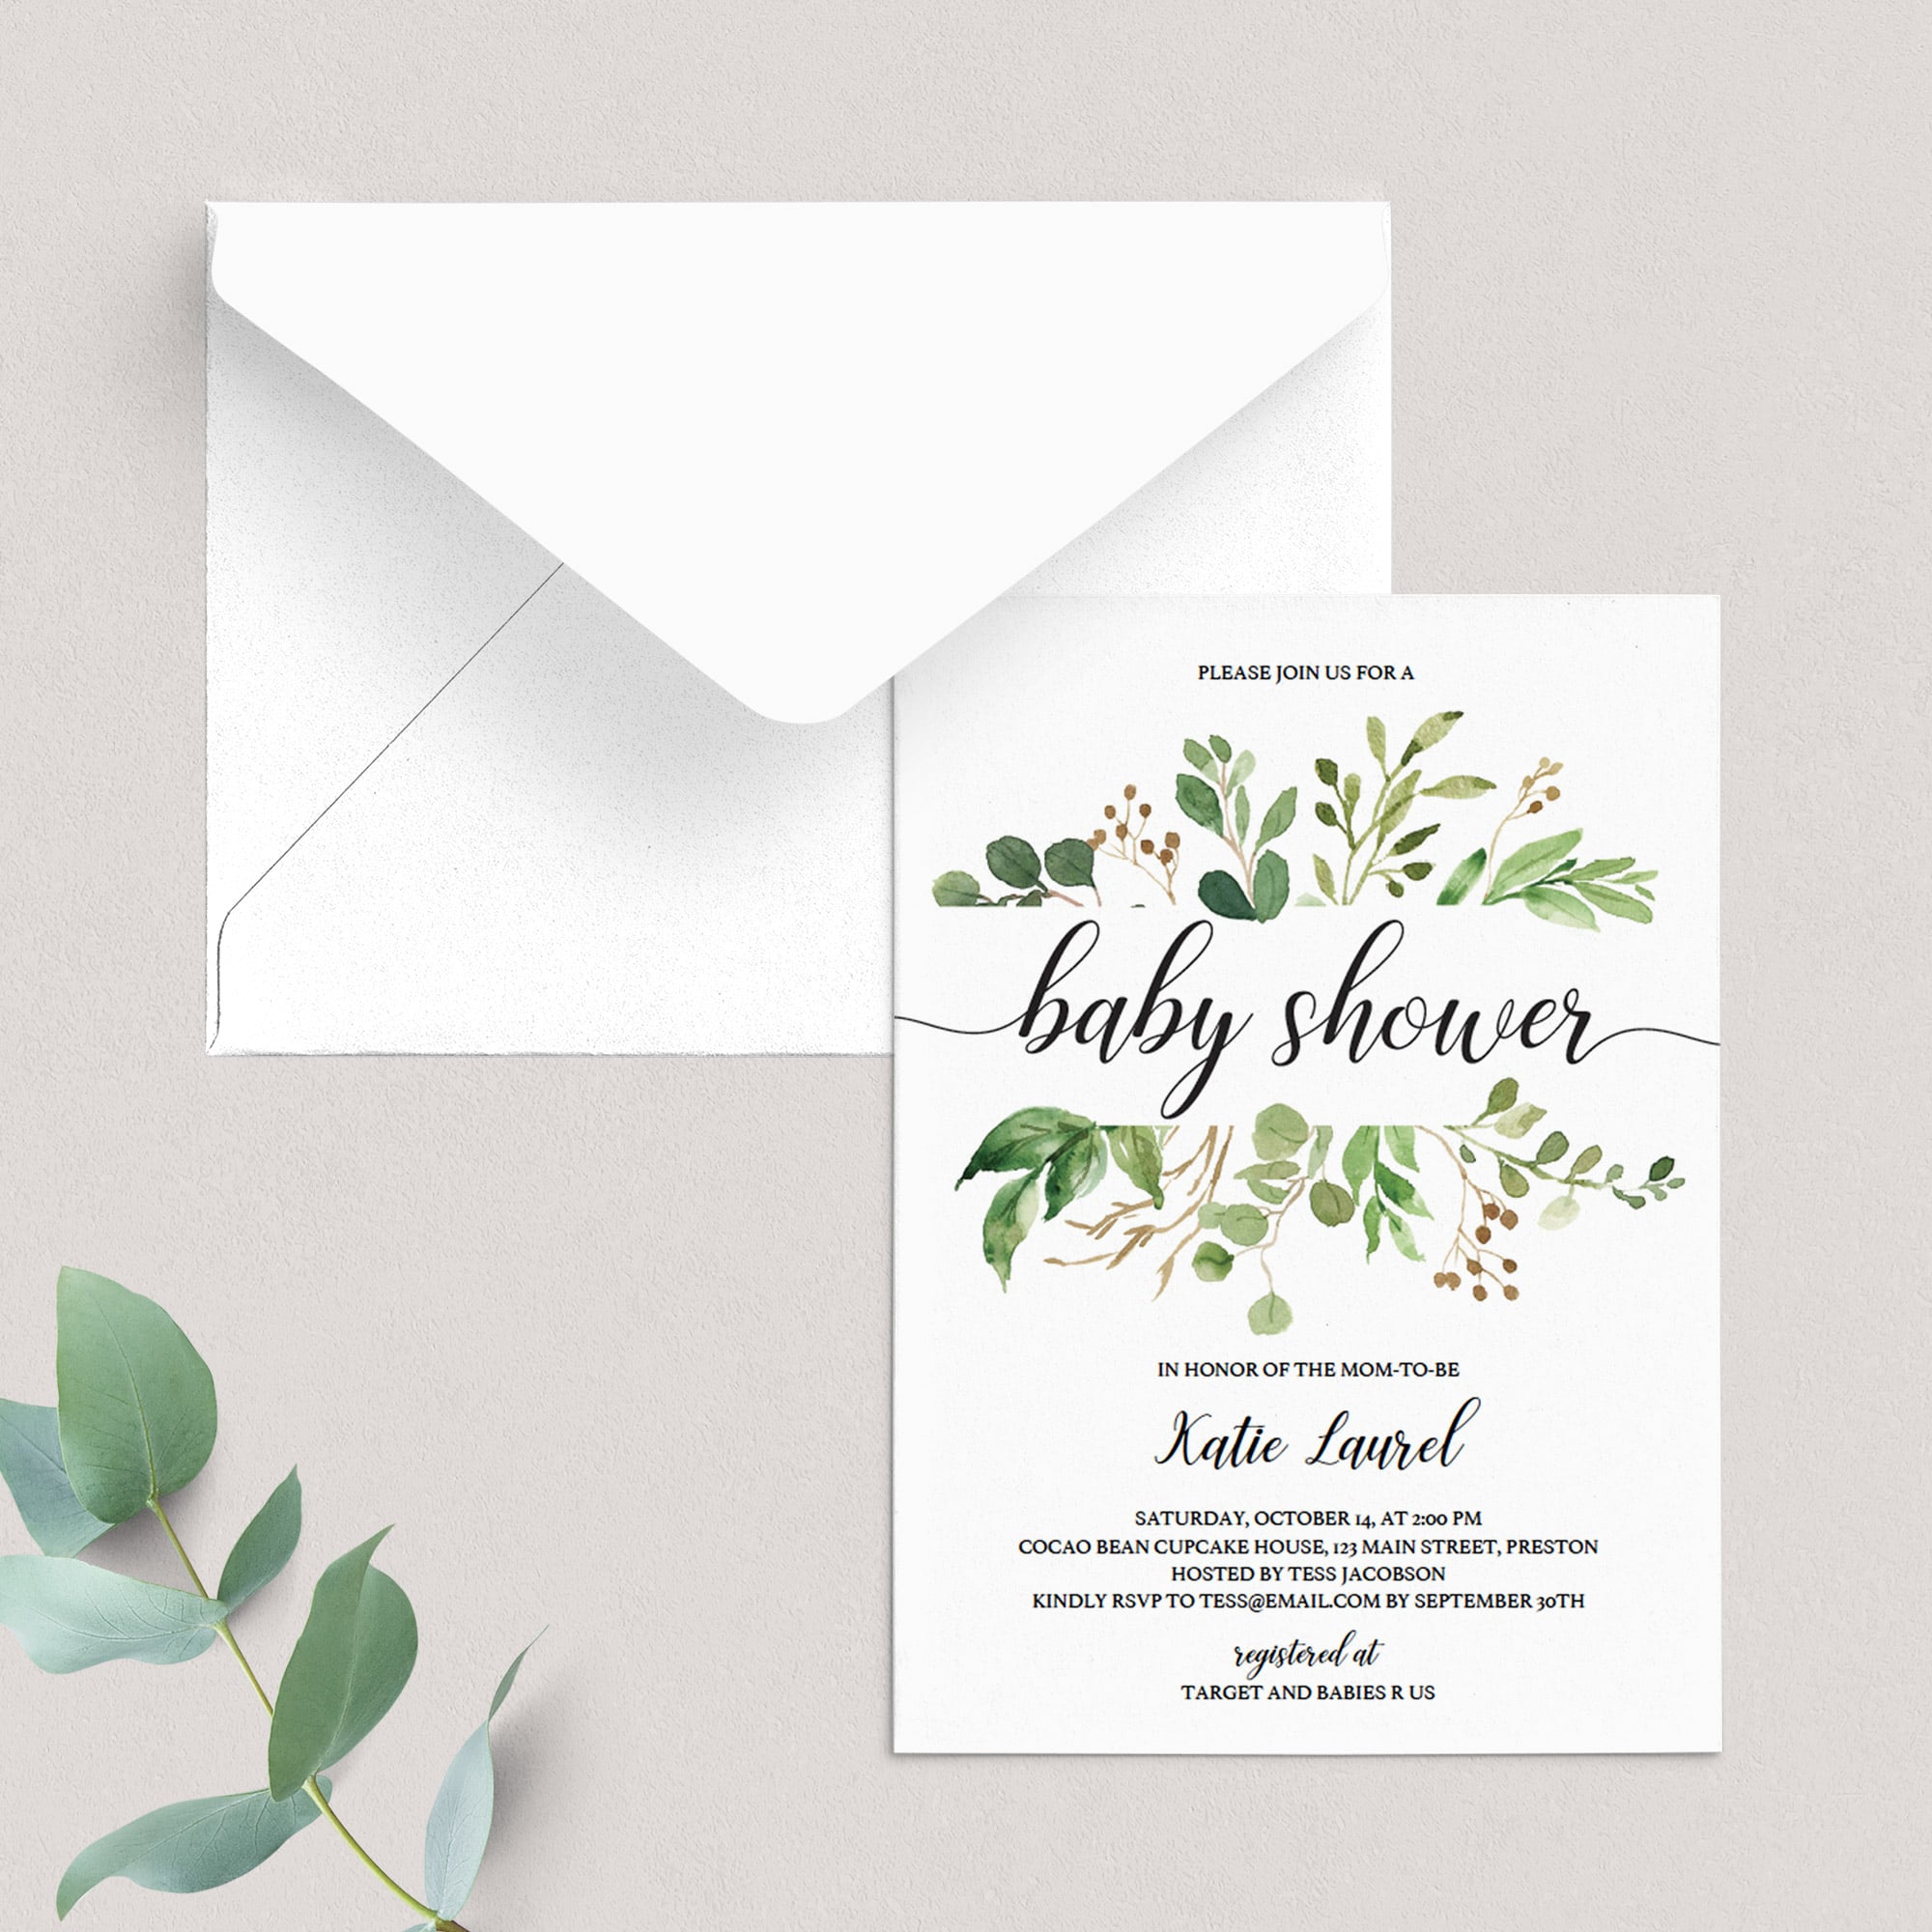 Greenery baby shower invite template by LittleSizzle